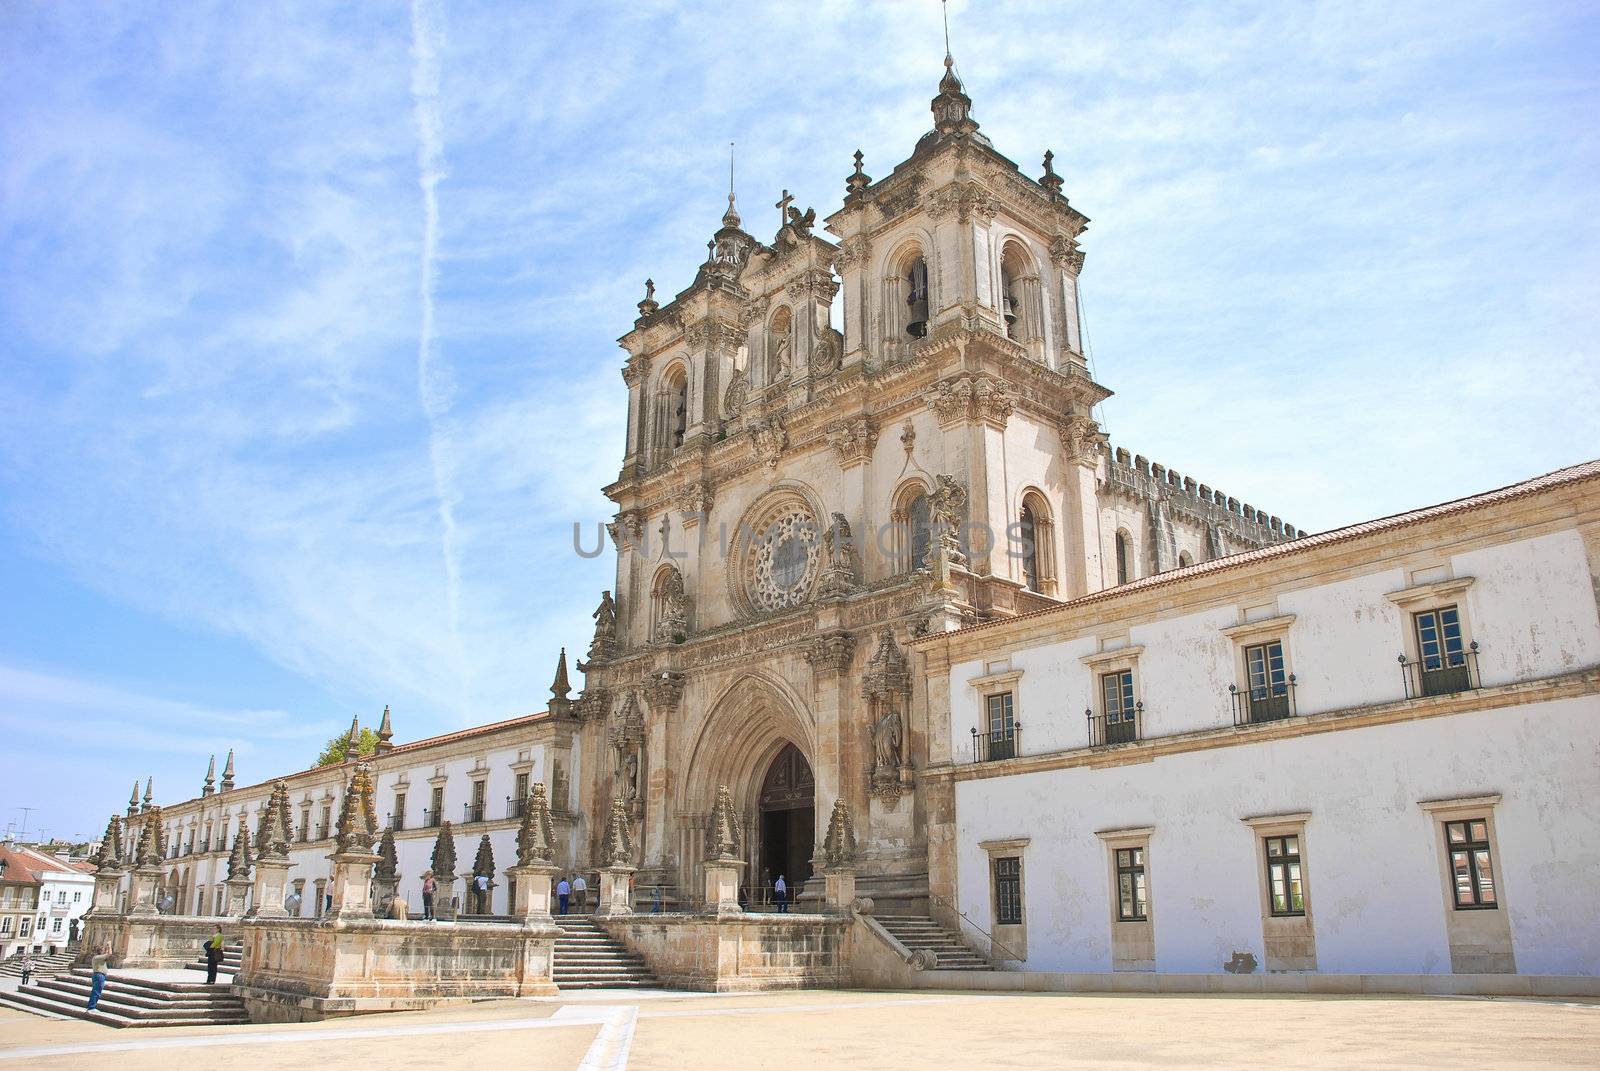 The Monastery of Alcobaca is a medieval monastery in central Portugal. It is a UNESCO World Heritage Site.